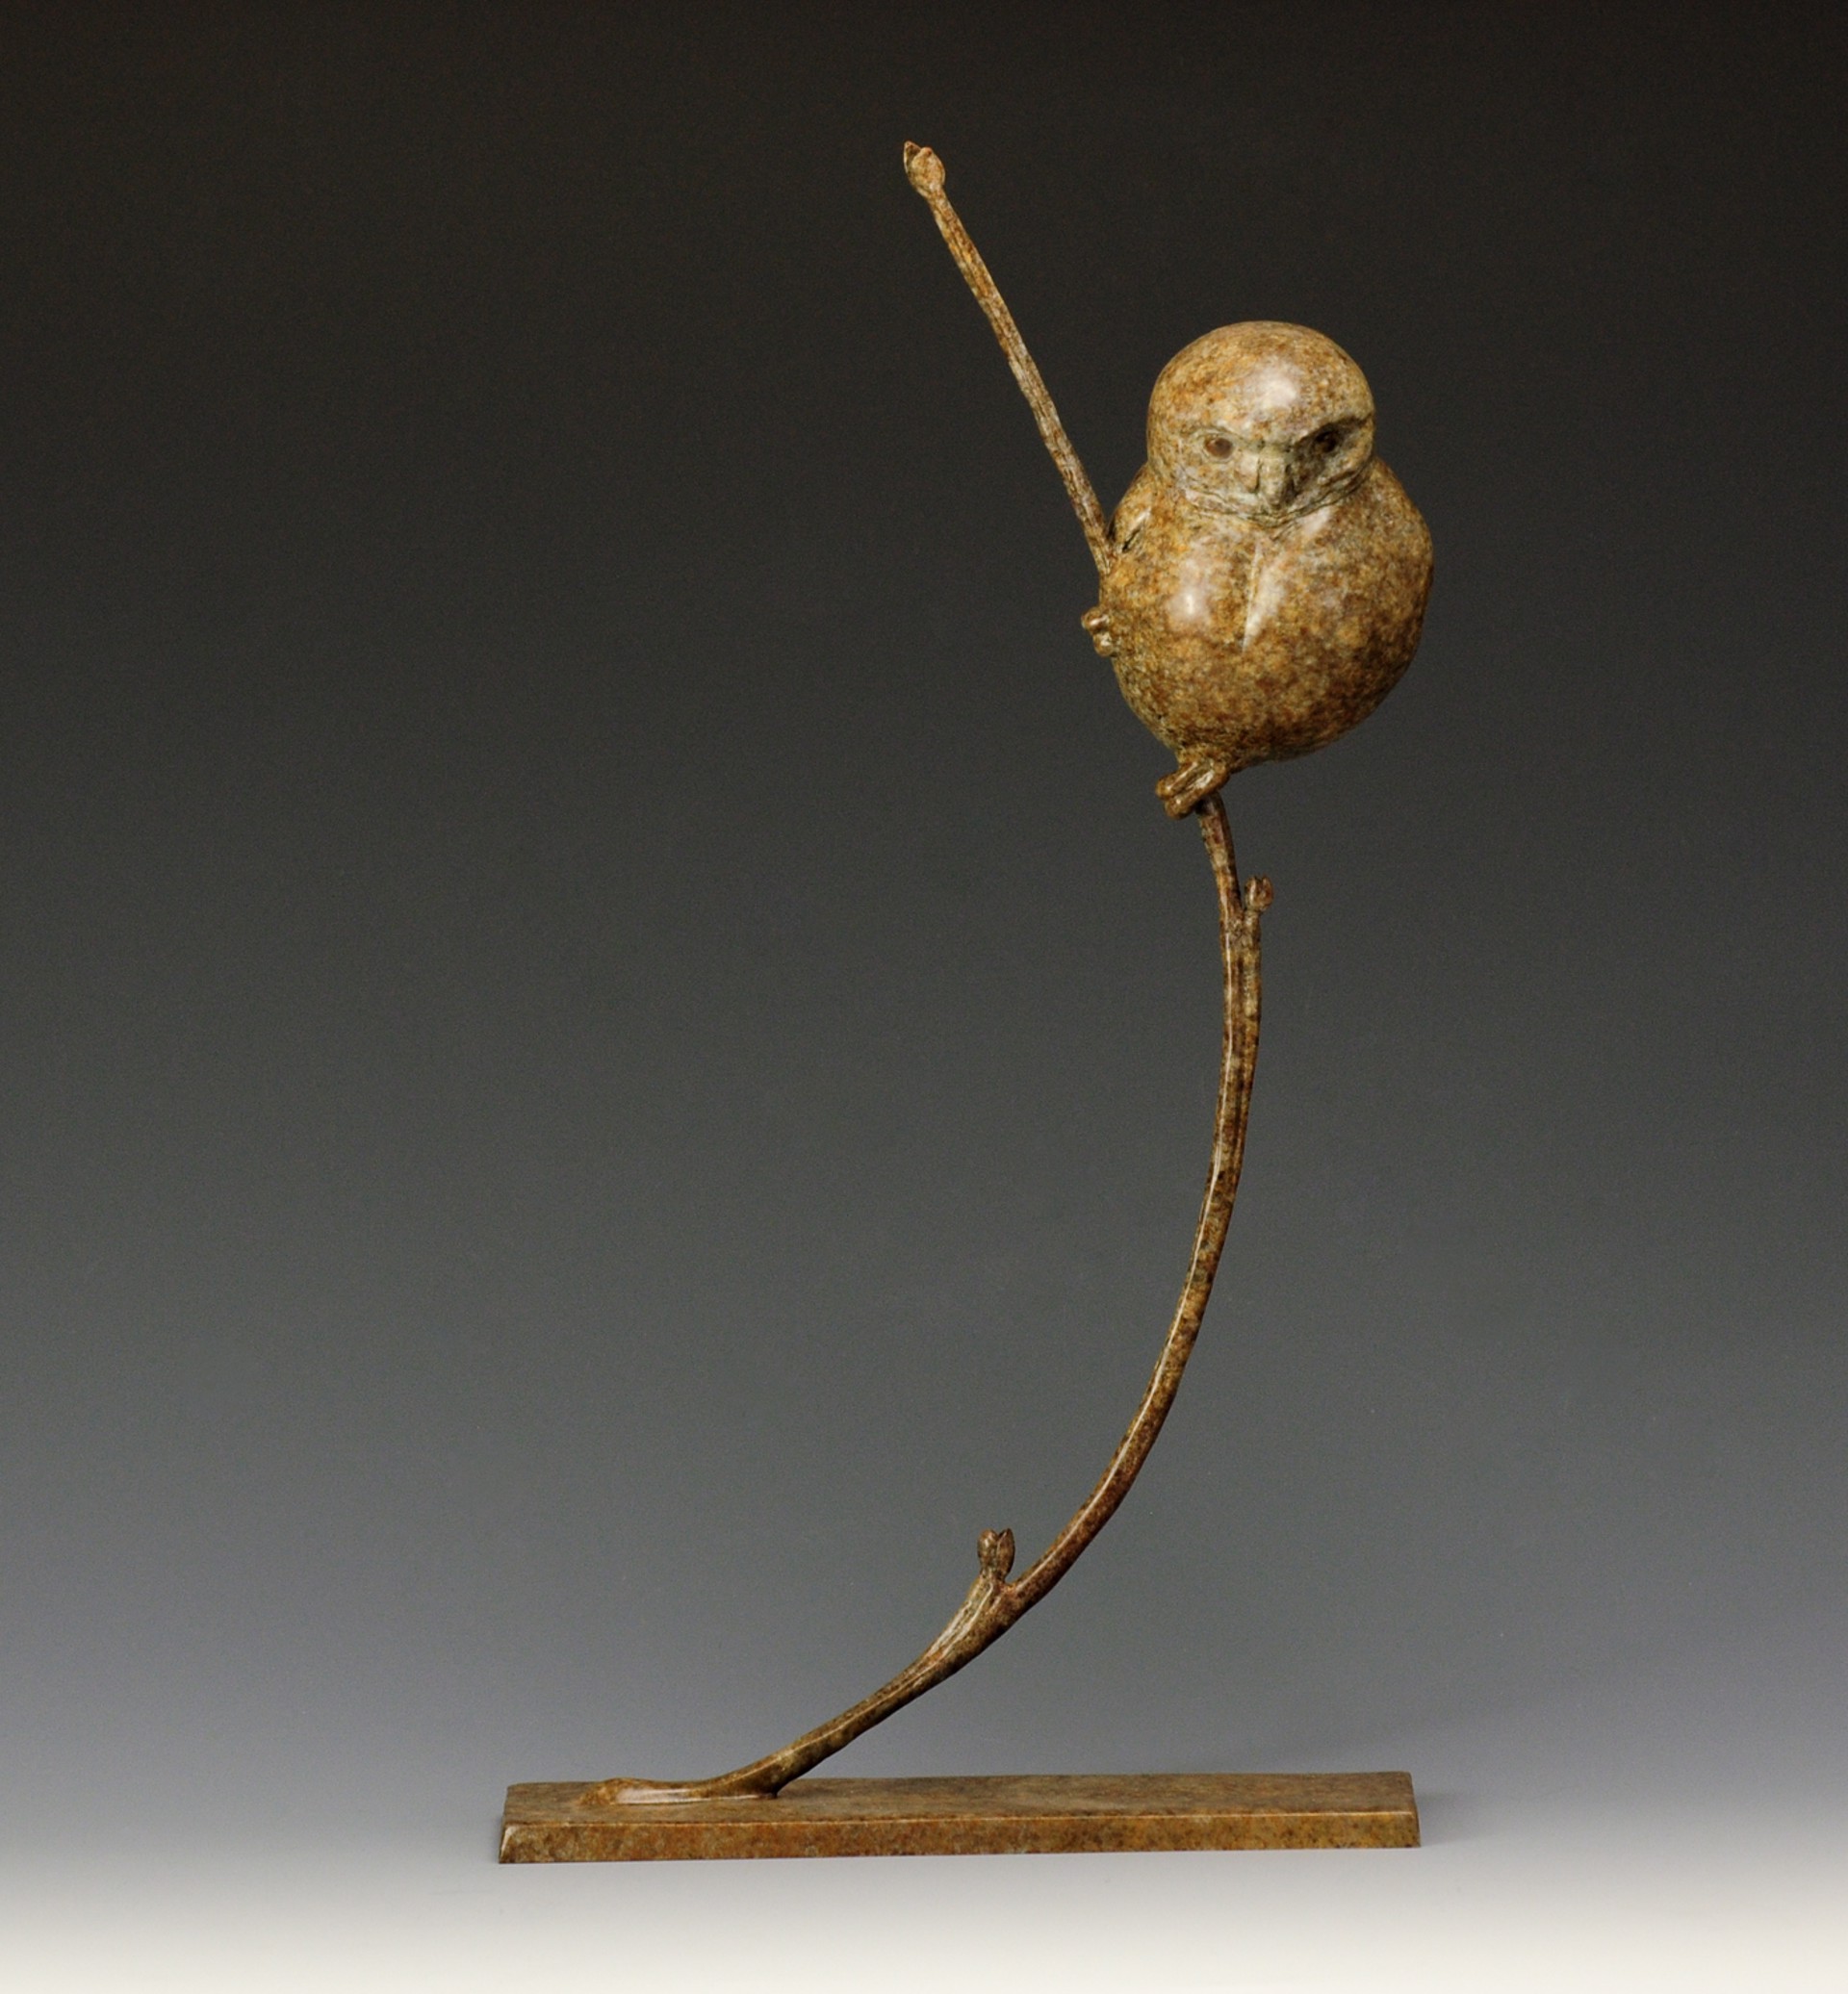 A Fine Art Sculpture In Bronze By Jeremy Bradshaw Featuring A Pygmy Owl Perched On A Branch, Available At Gallery Wild